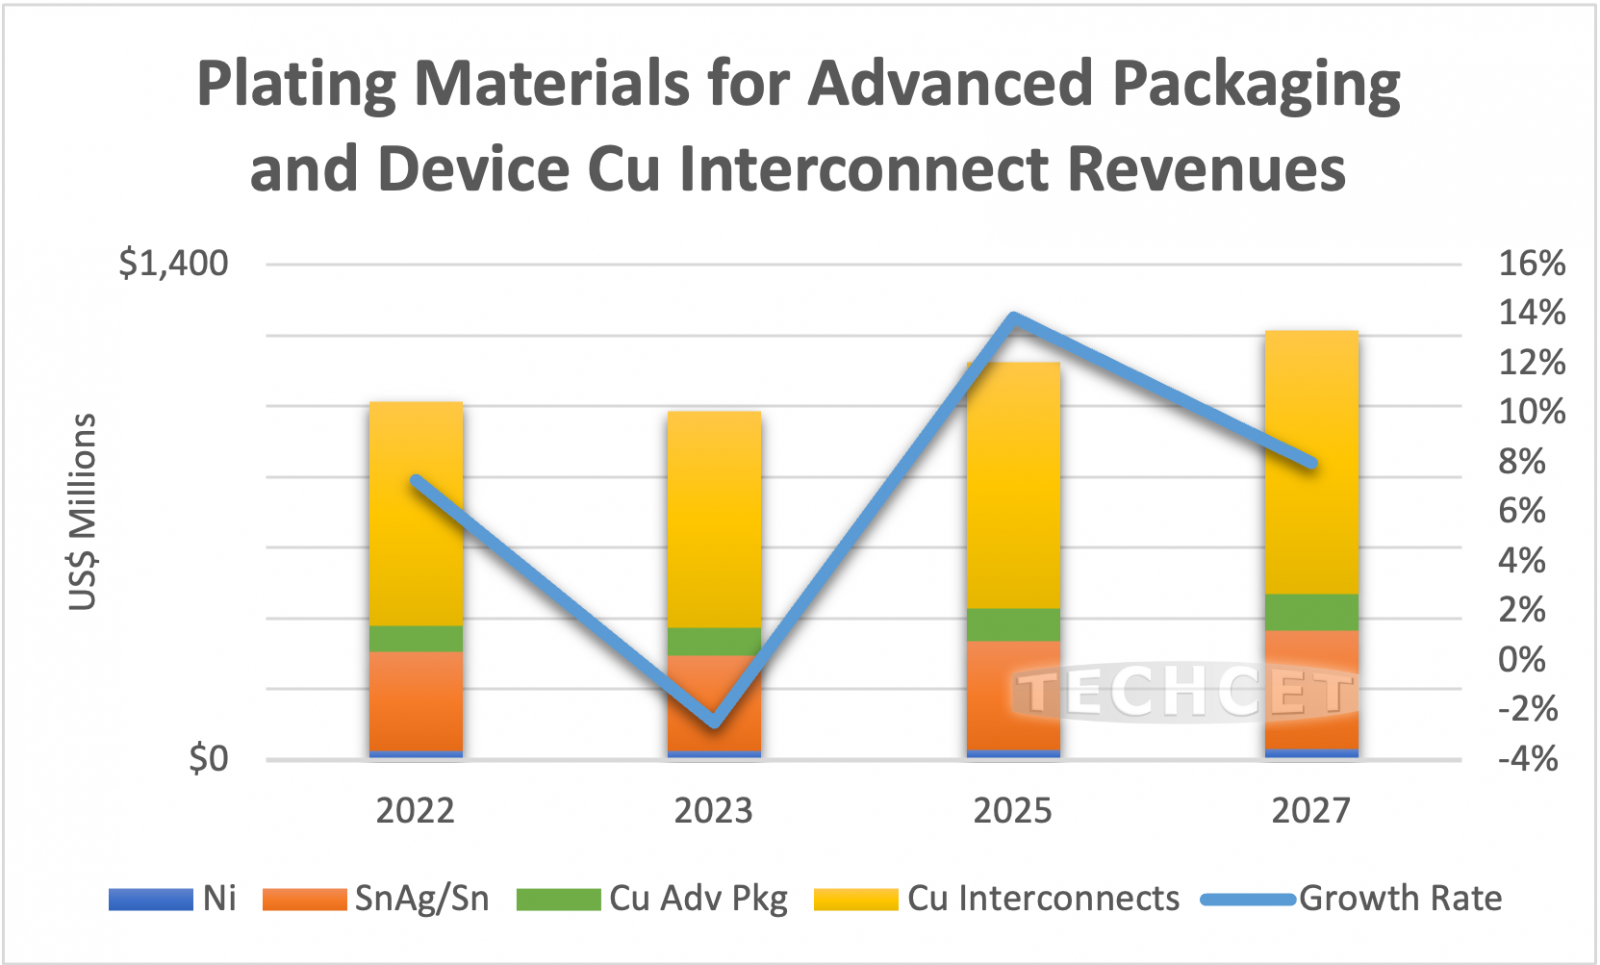 Plating Materials for Advanced Packaging and Device Cu Interconnect Revenues